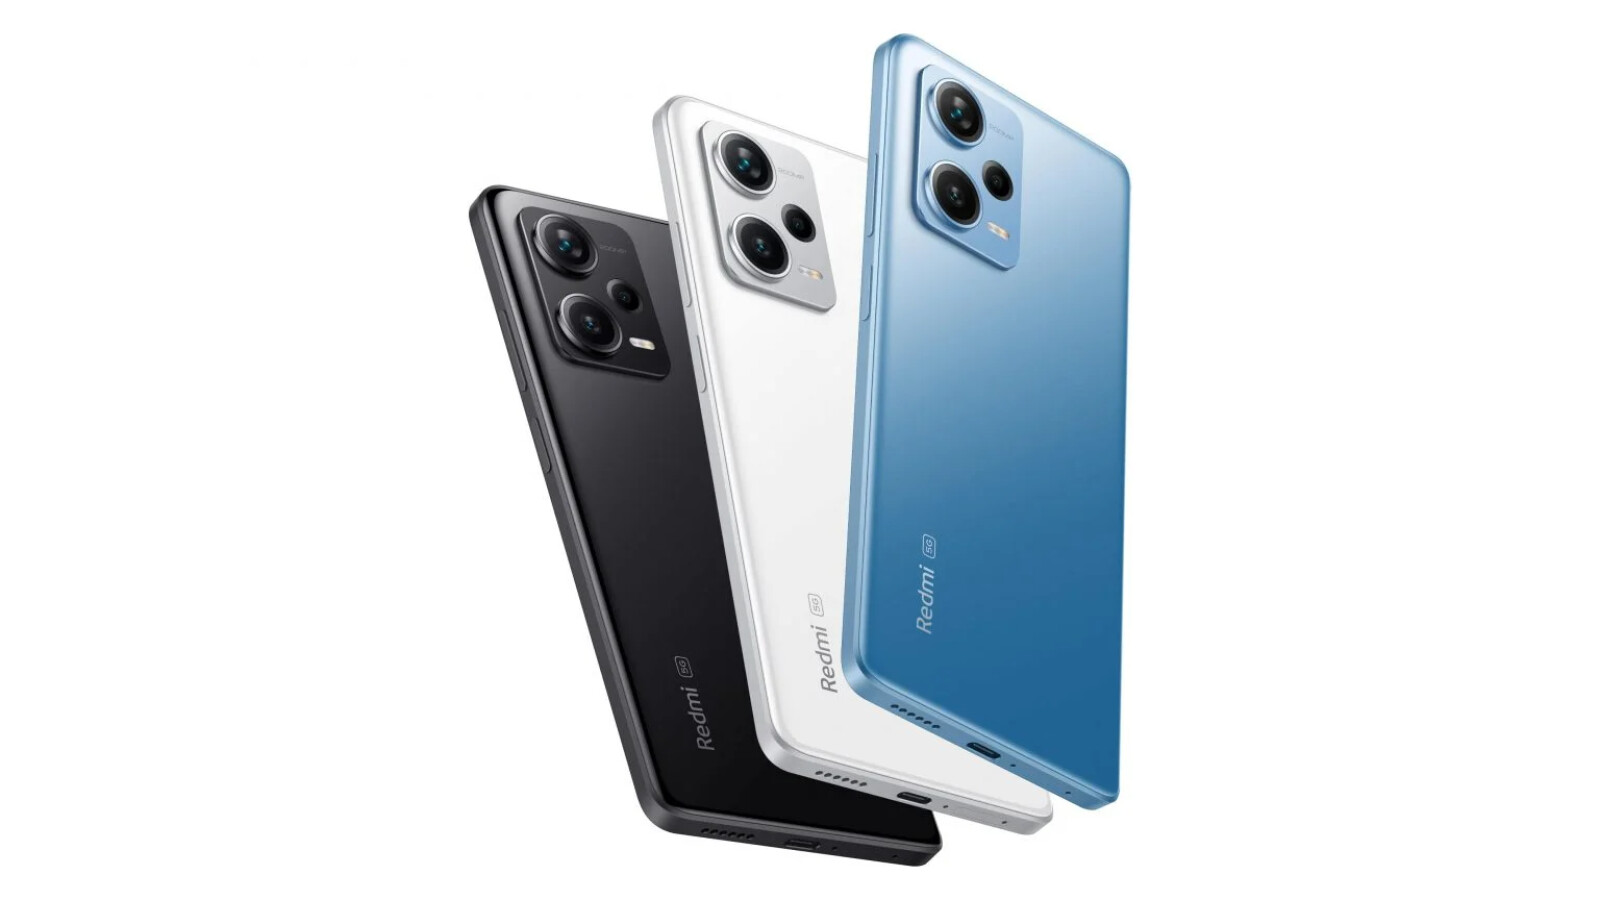  Three Xiaomi Redmi Turbo 3 smartphones in black, white, and blue colors with a gradient back design and a triple camera system.